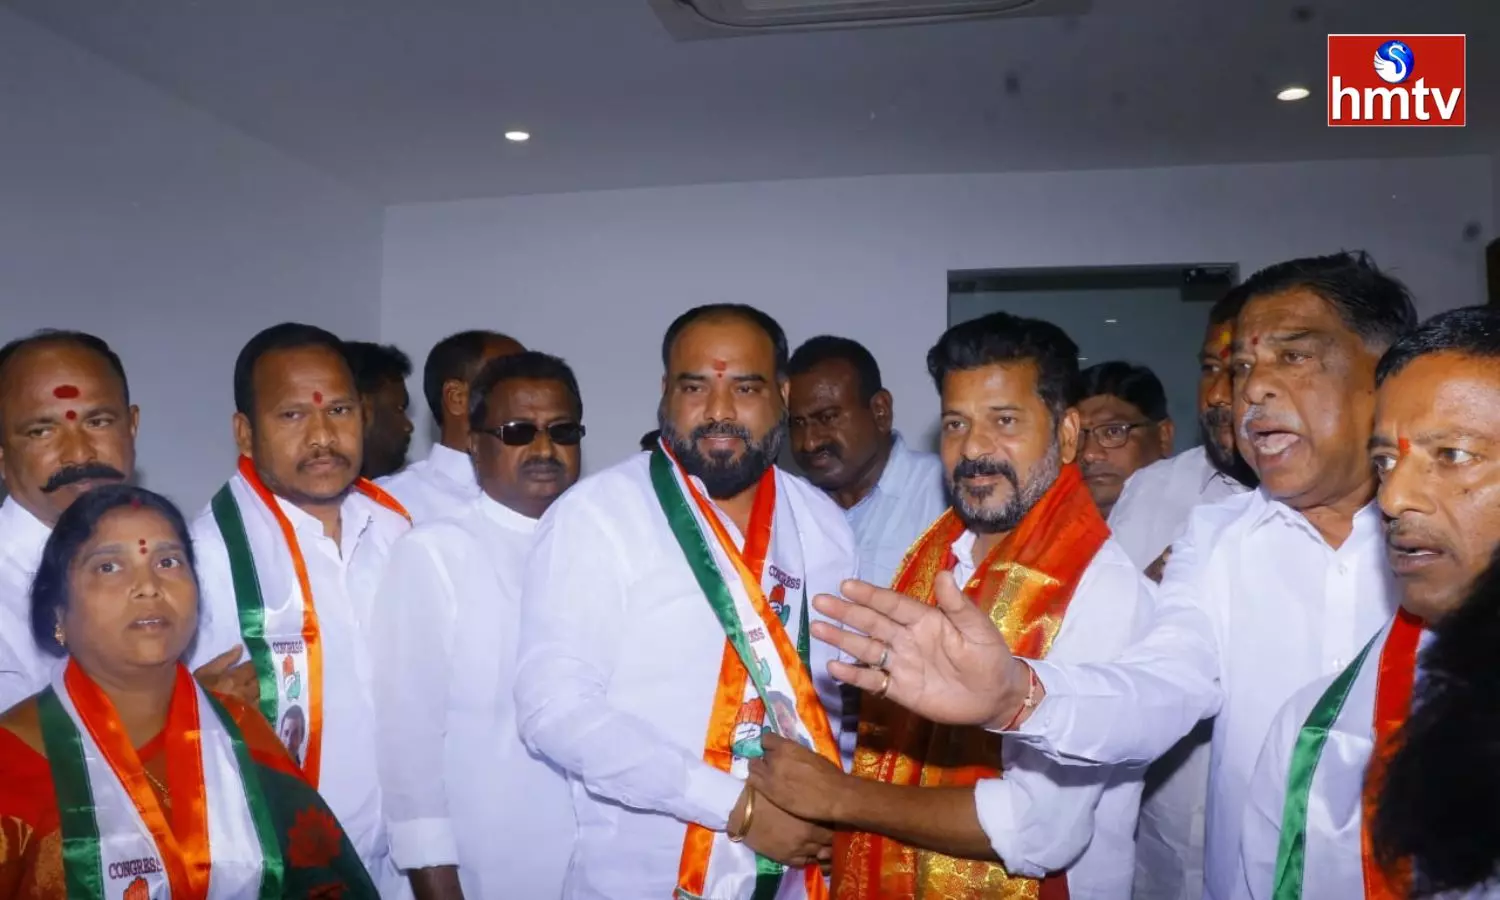 Boduppal Corporators Who Joined The Congress With The Presence Of Revanth Reddy